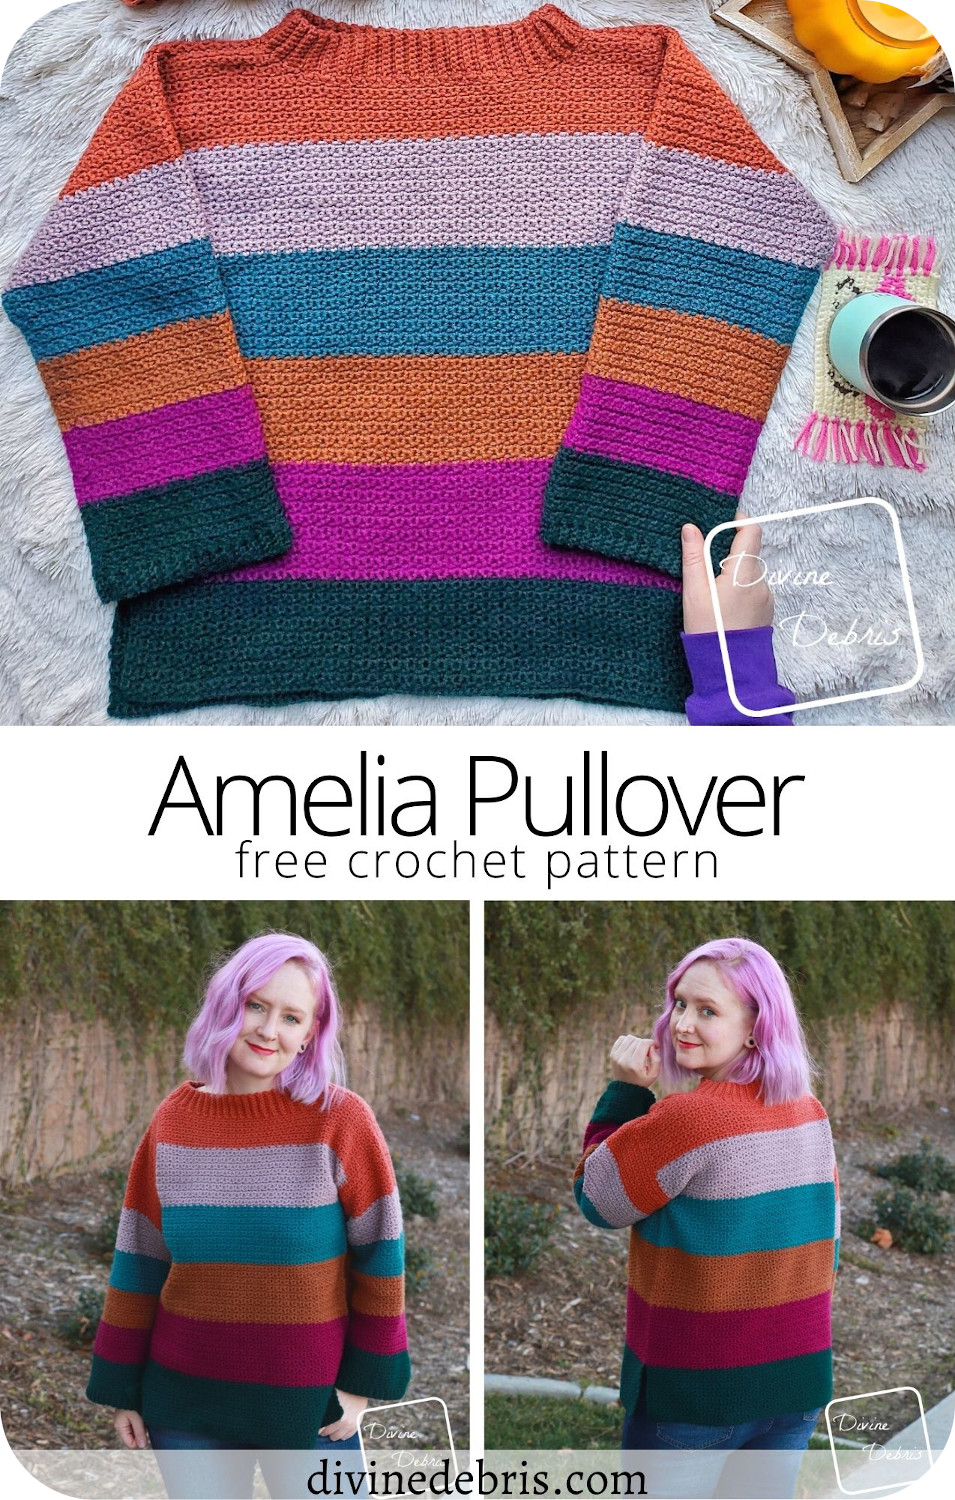 Have fun and learn to make the bold stripes and easy texture of the free Amelia Pullover crochet pattern by DivineDebris.com 